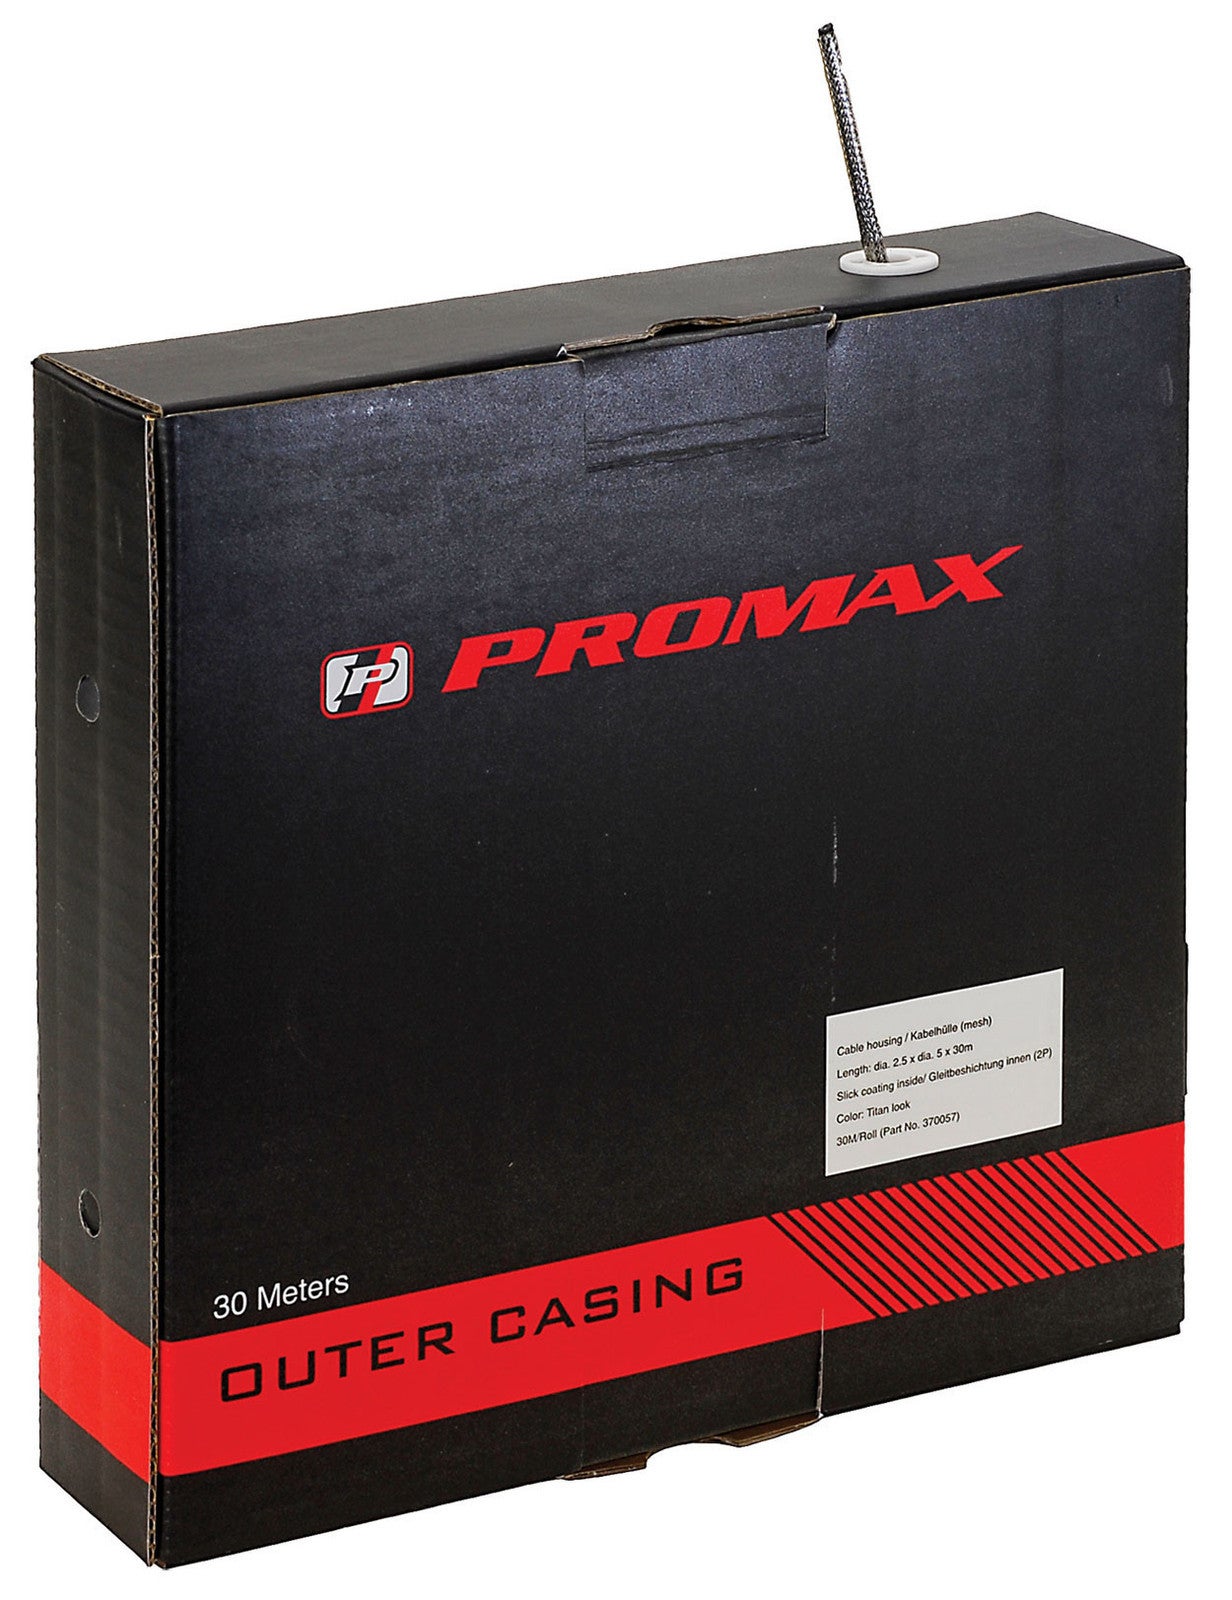  Promax Outer Casing For Brake Cables 2P Teflon For 1.6-2.0MM Brake 30M Roll In Display Box.